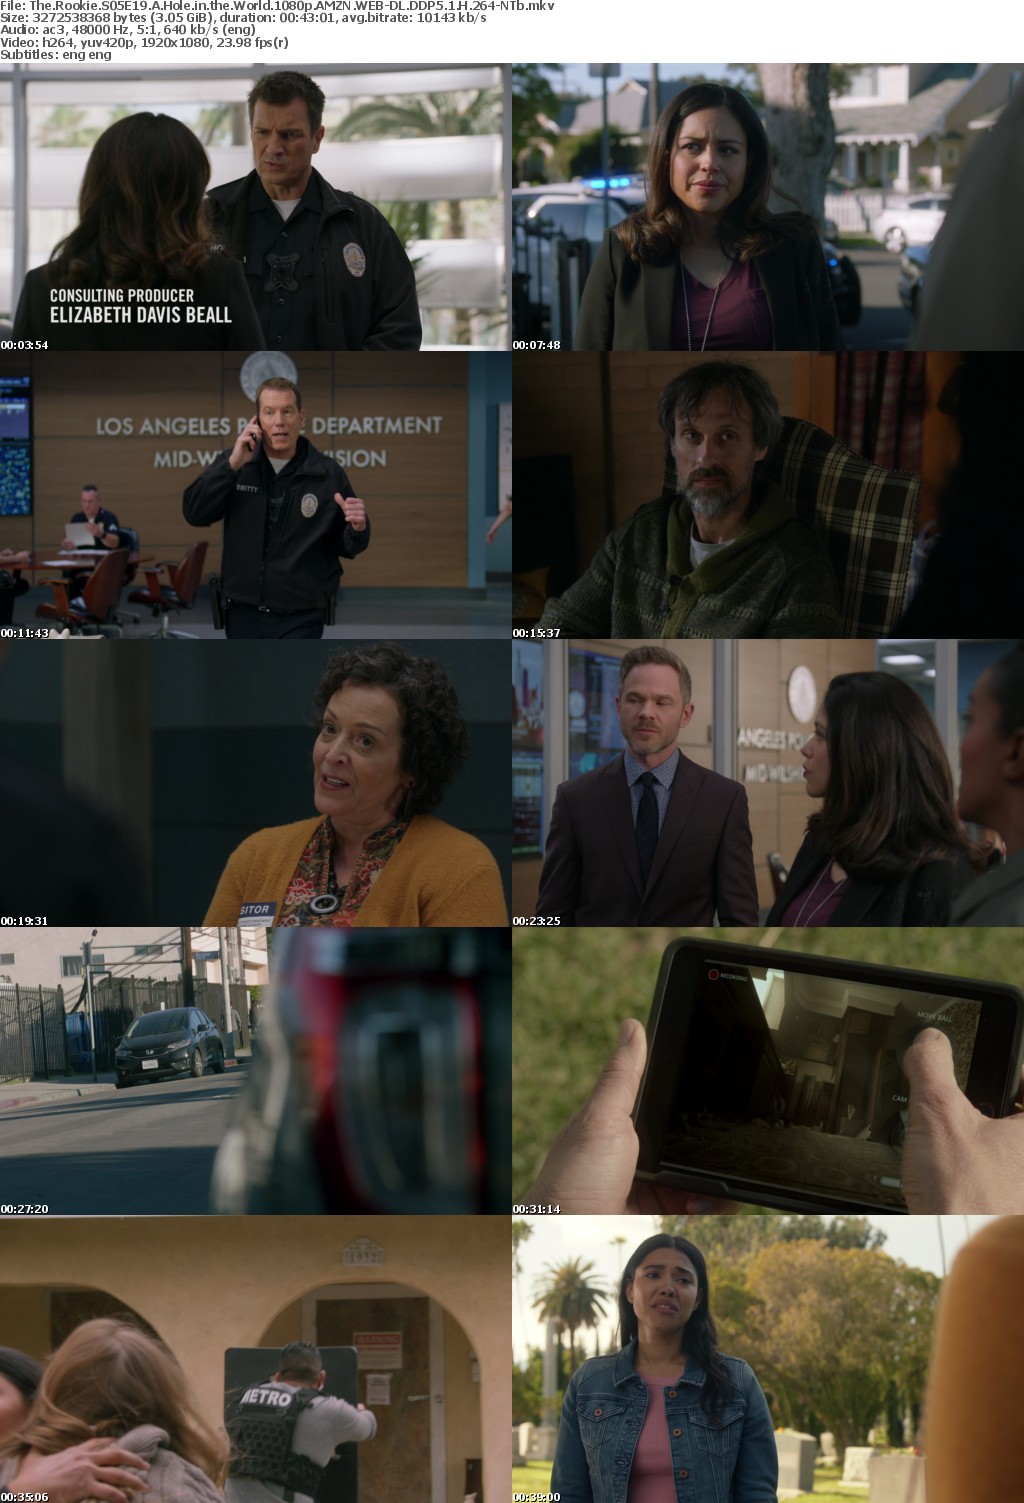 The Rookie S05E19 A Hole in the World 1080p AMZN WEBRip DDP5 1 x264-NTb